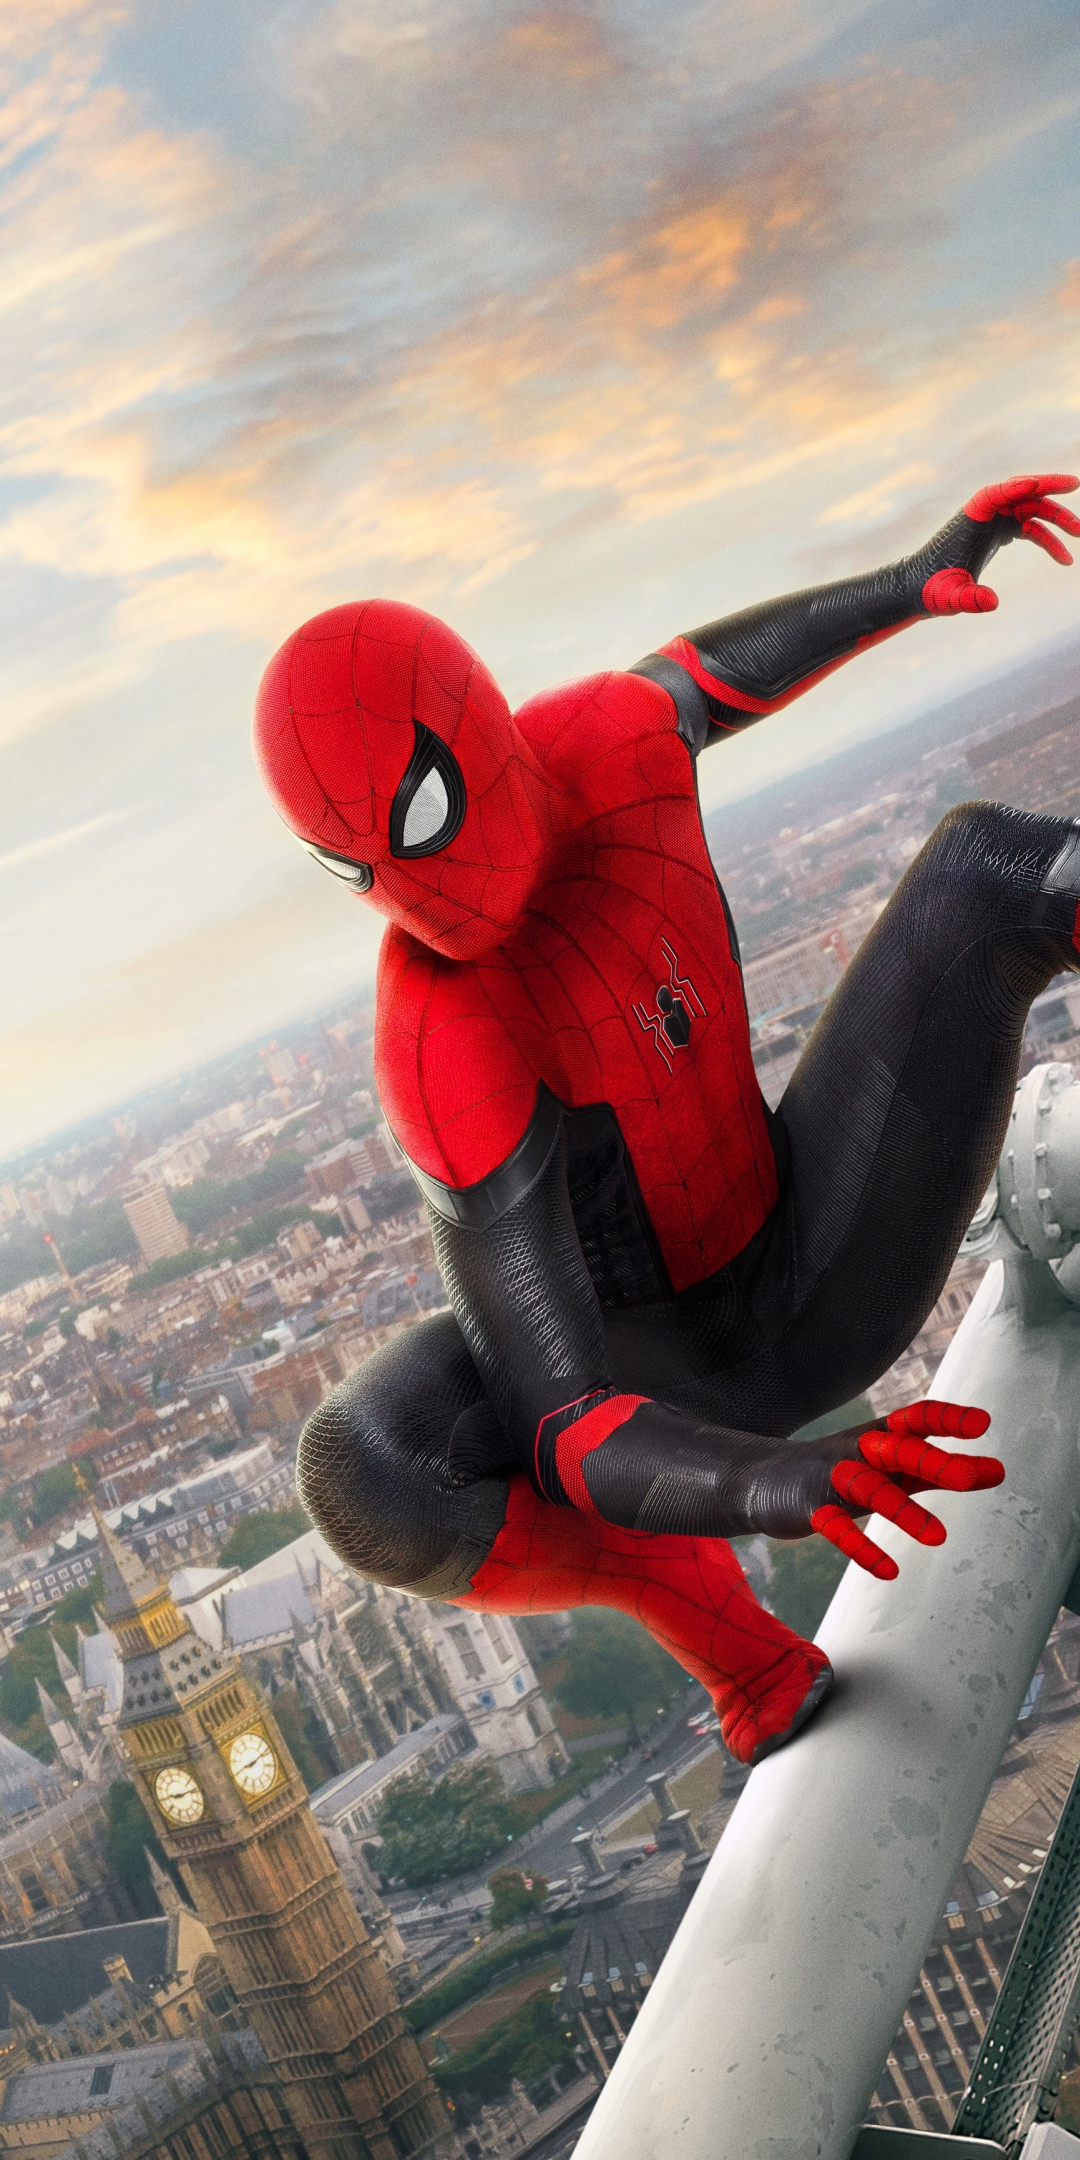 Spider-man, movie 2019, Far From Home, 1080x2160 wallpaper